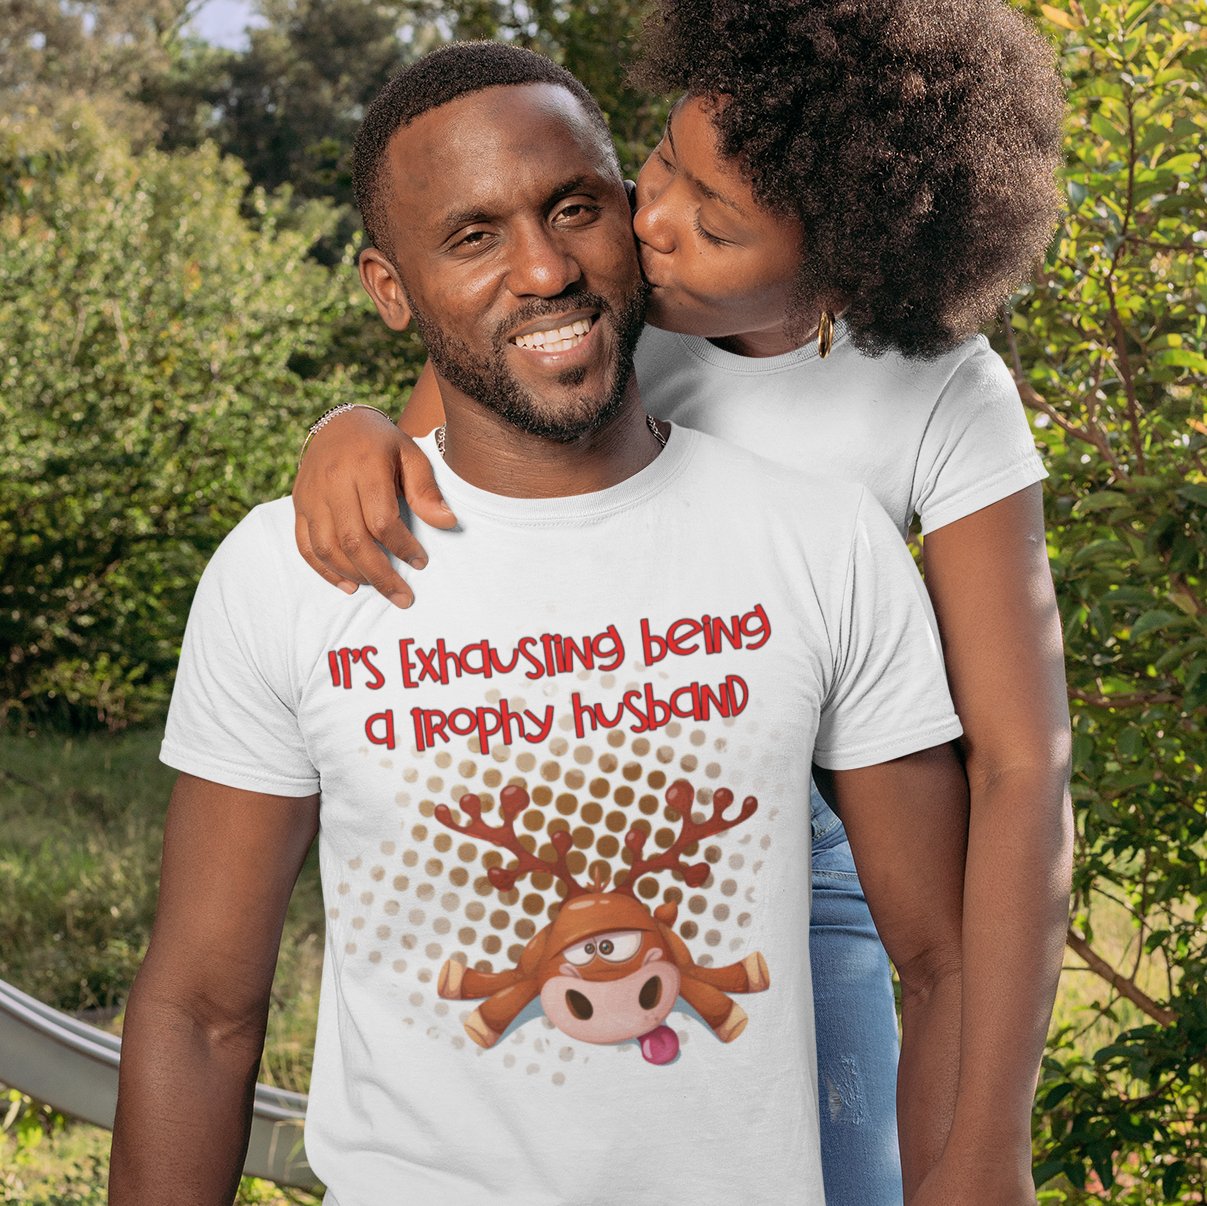 Wear the Crown: 'It's Exhausting Being a Trophy Husband' T-Shirt – Where Comfort Meets Tongue-in-Cheek Charm!